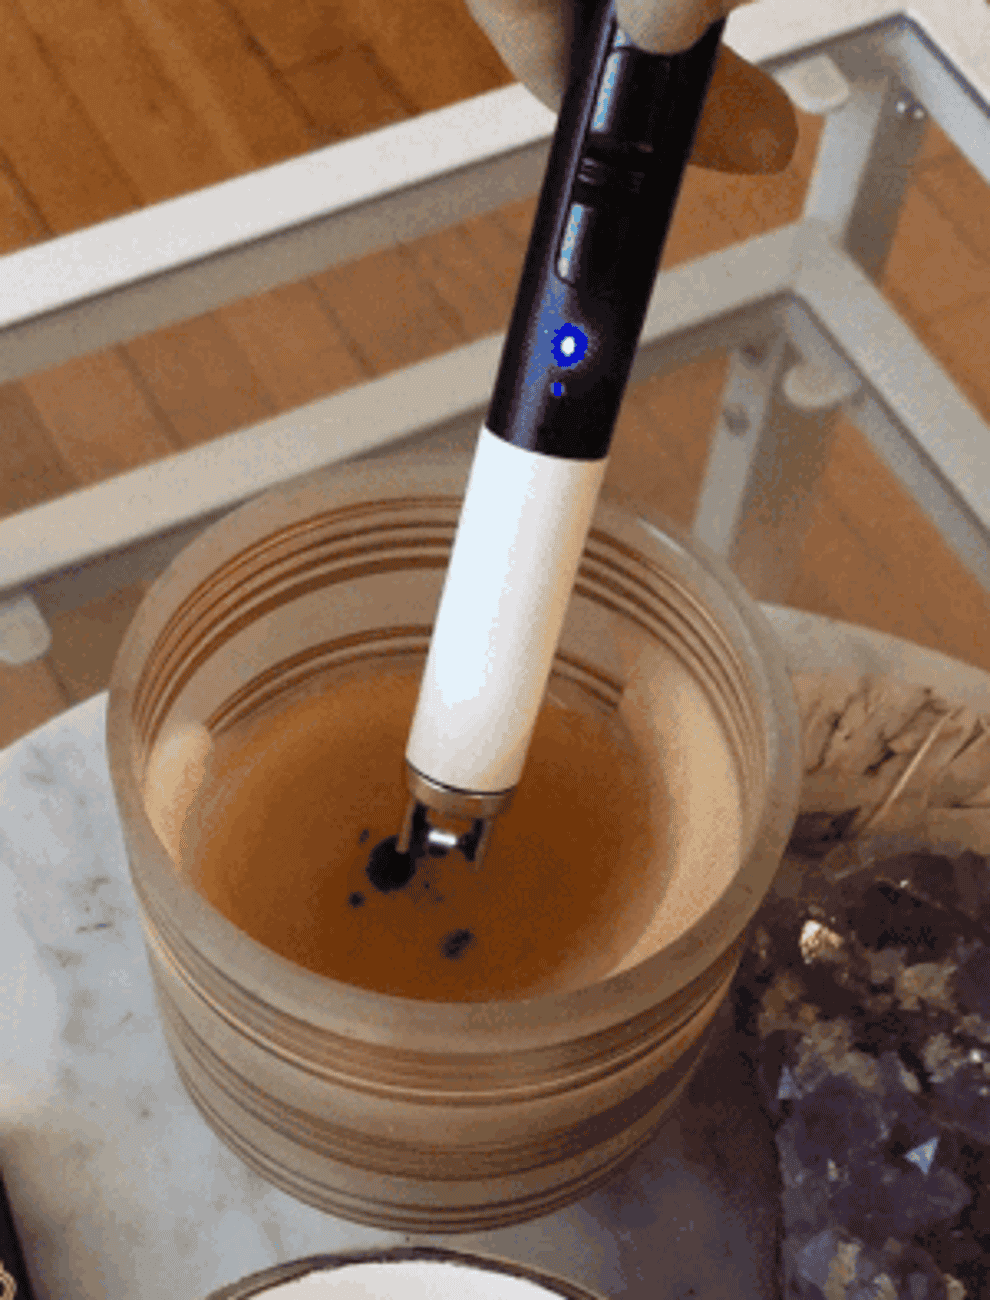 buzzfeed editor&#x27;s gif using the lighter to light a candle